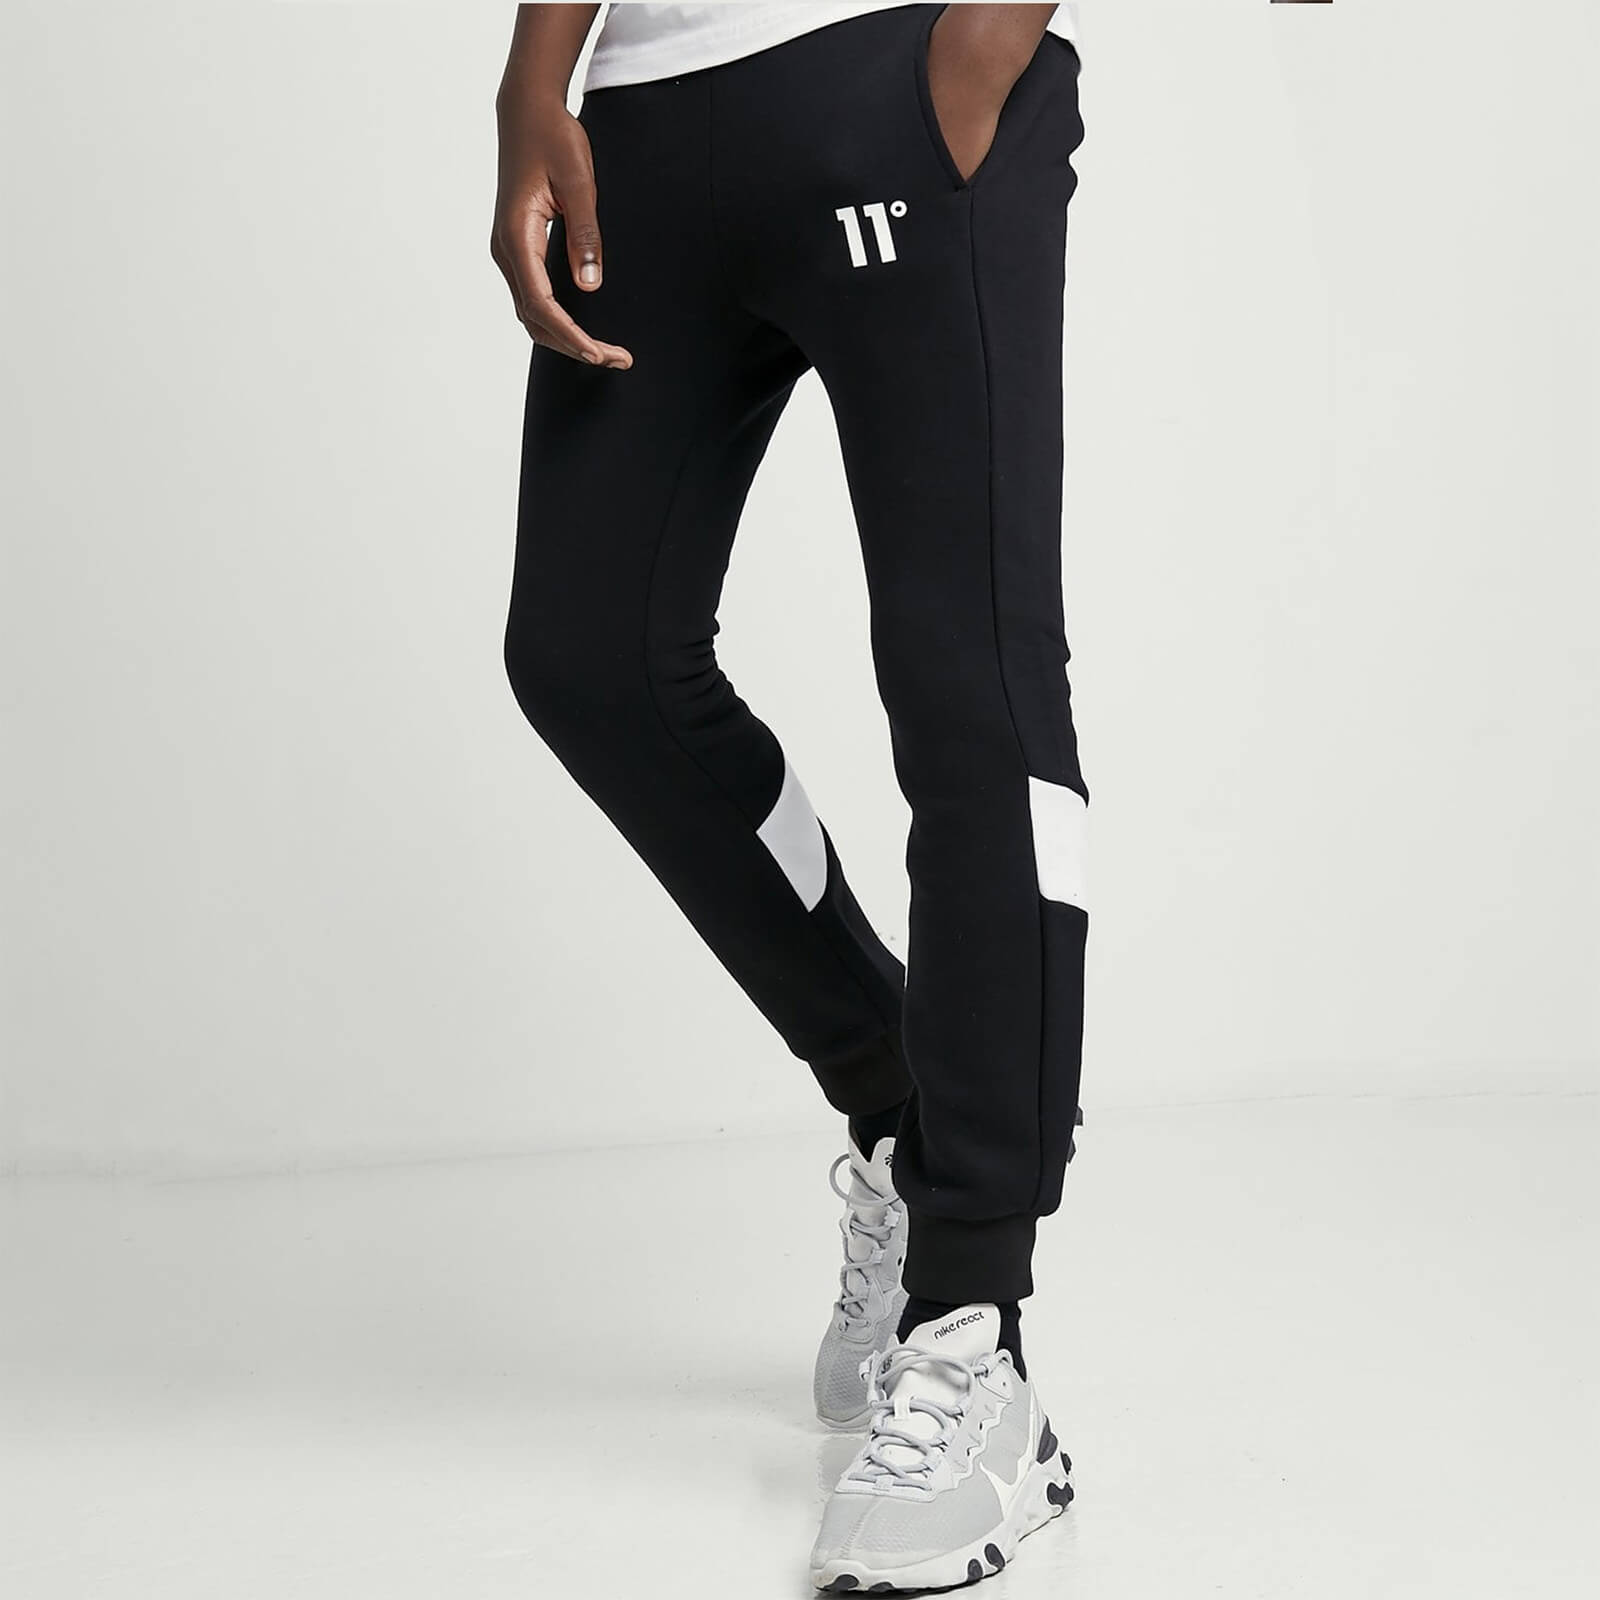 11 Degrees Junior Cut and Sew Panel Joggers – Black / White